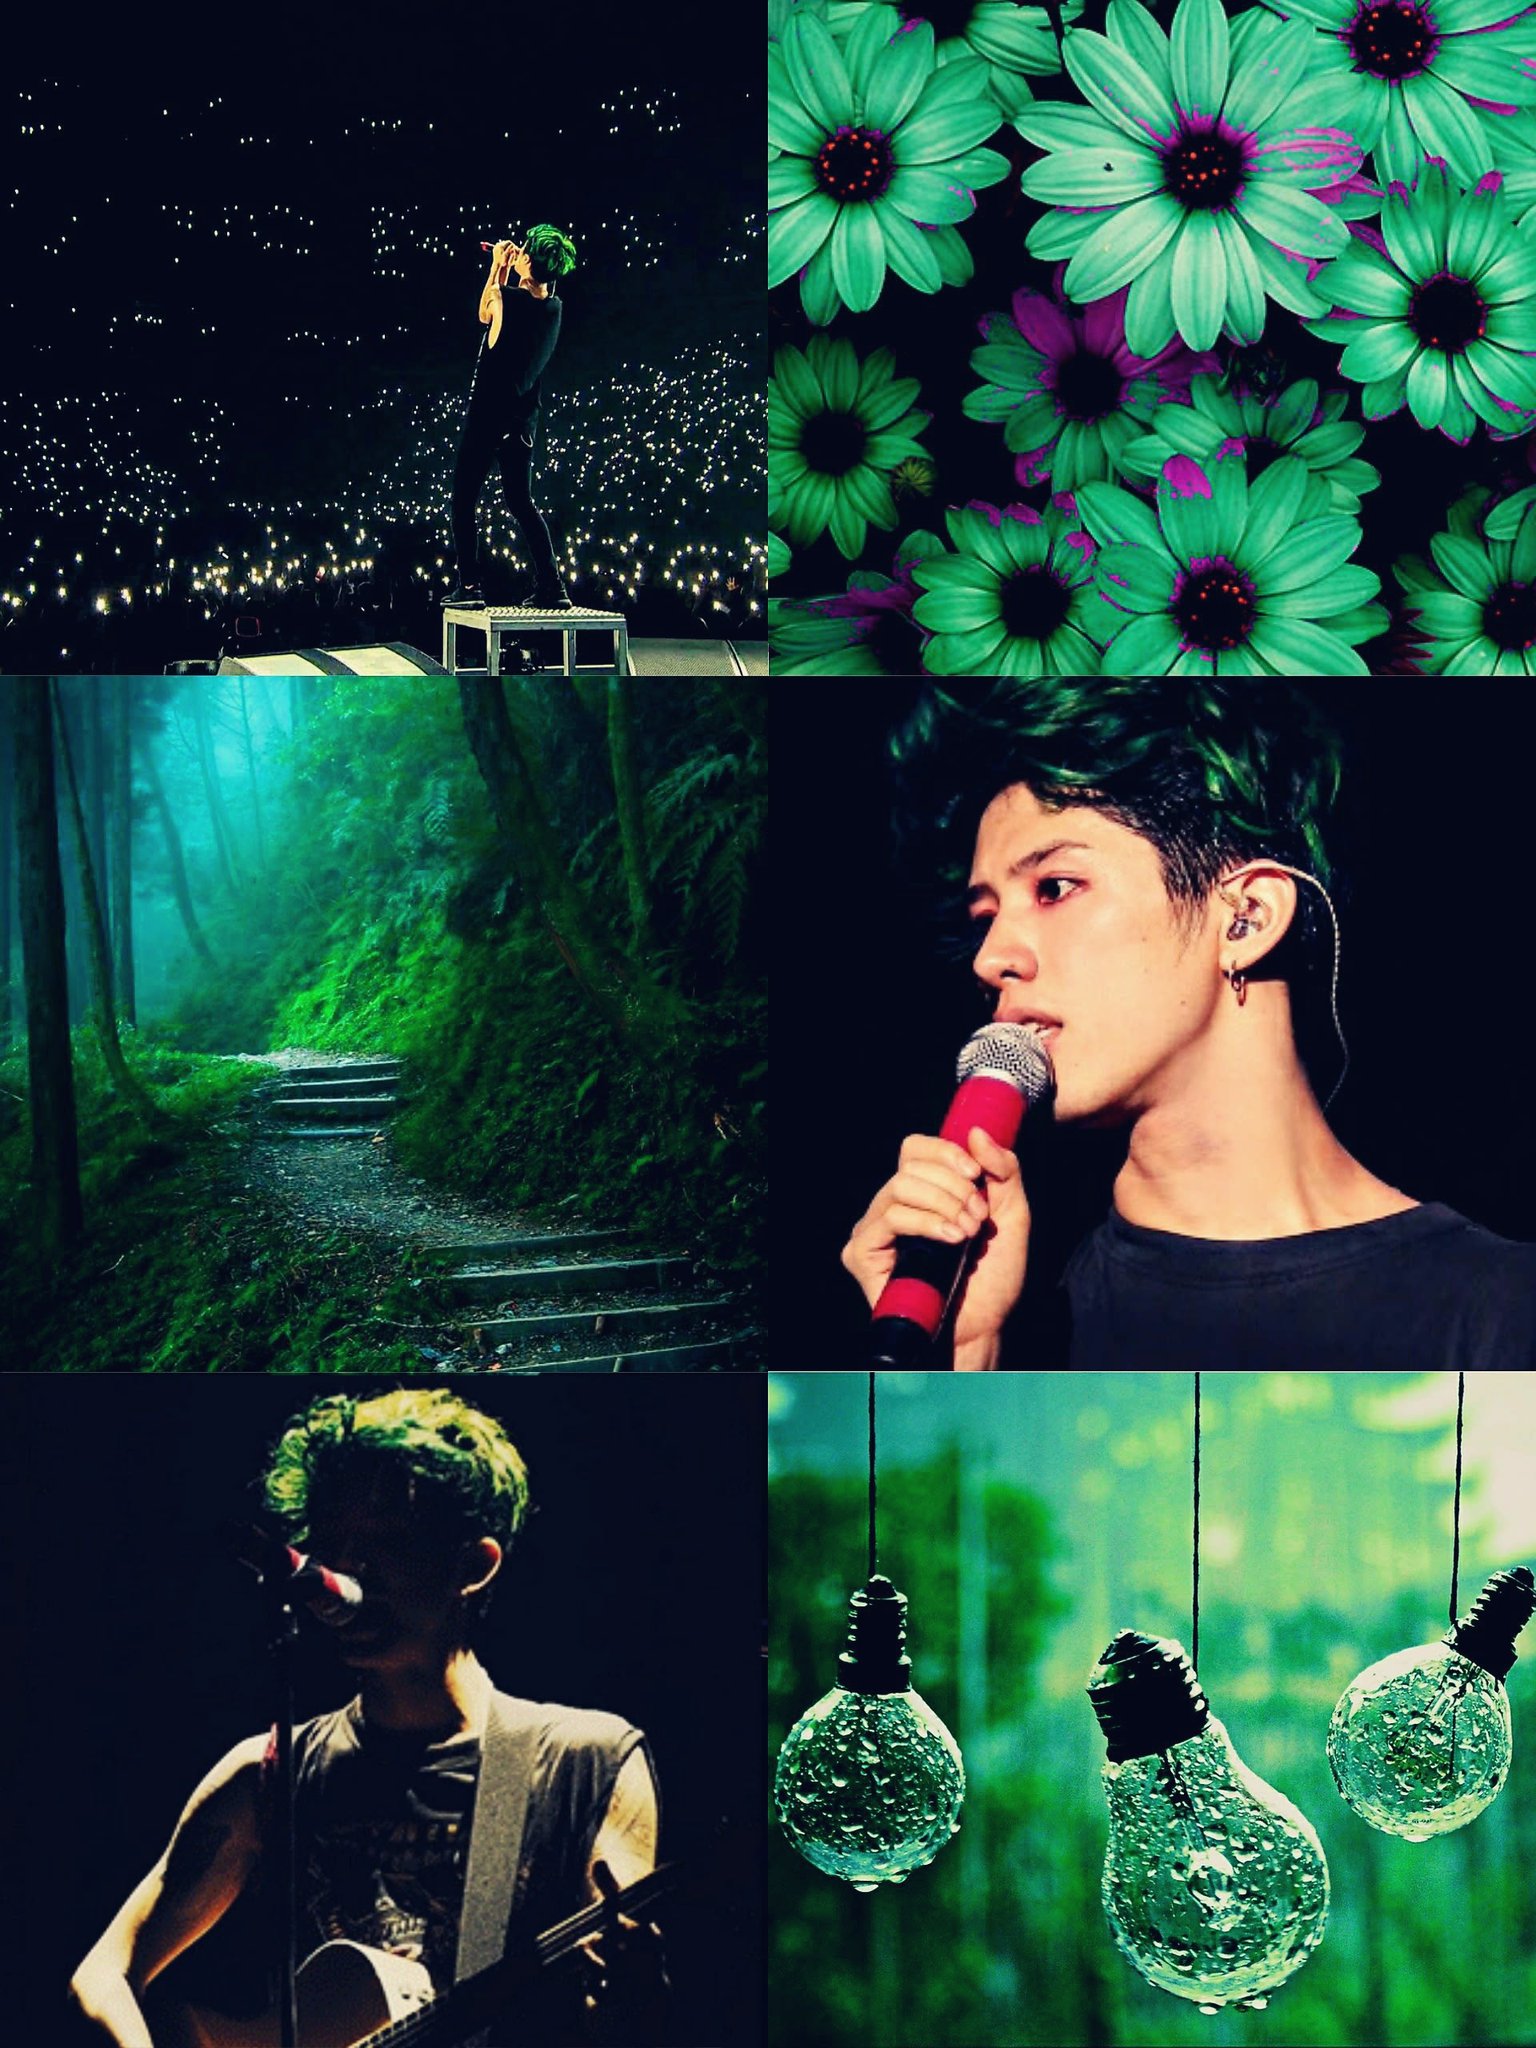 A collage of pictures with different people and flowers - Lime green